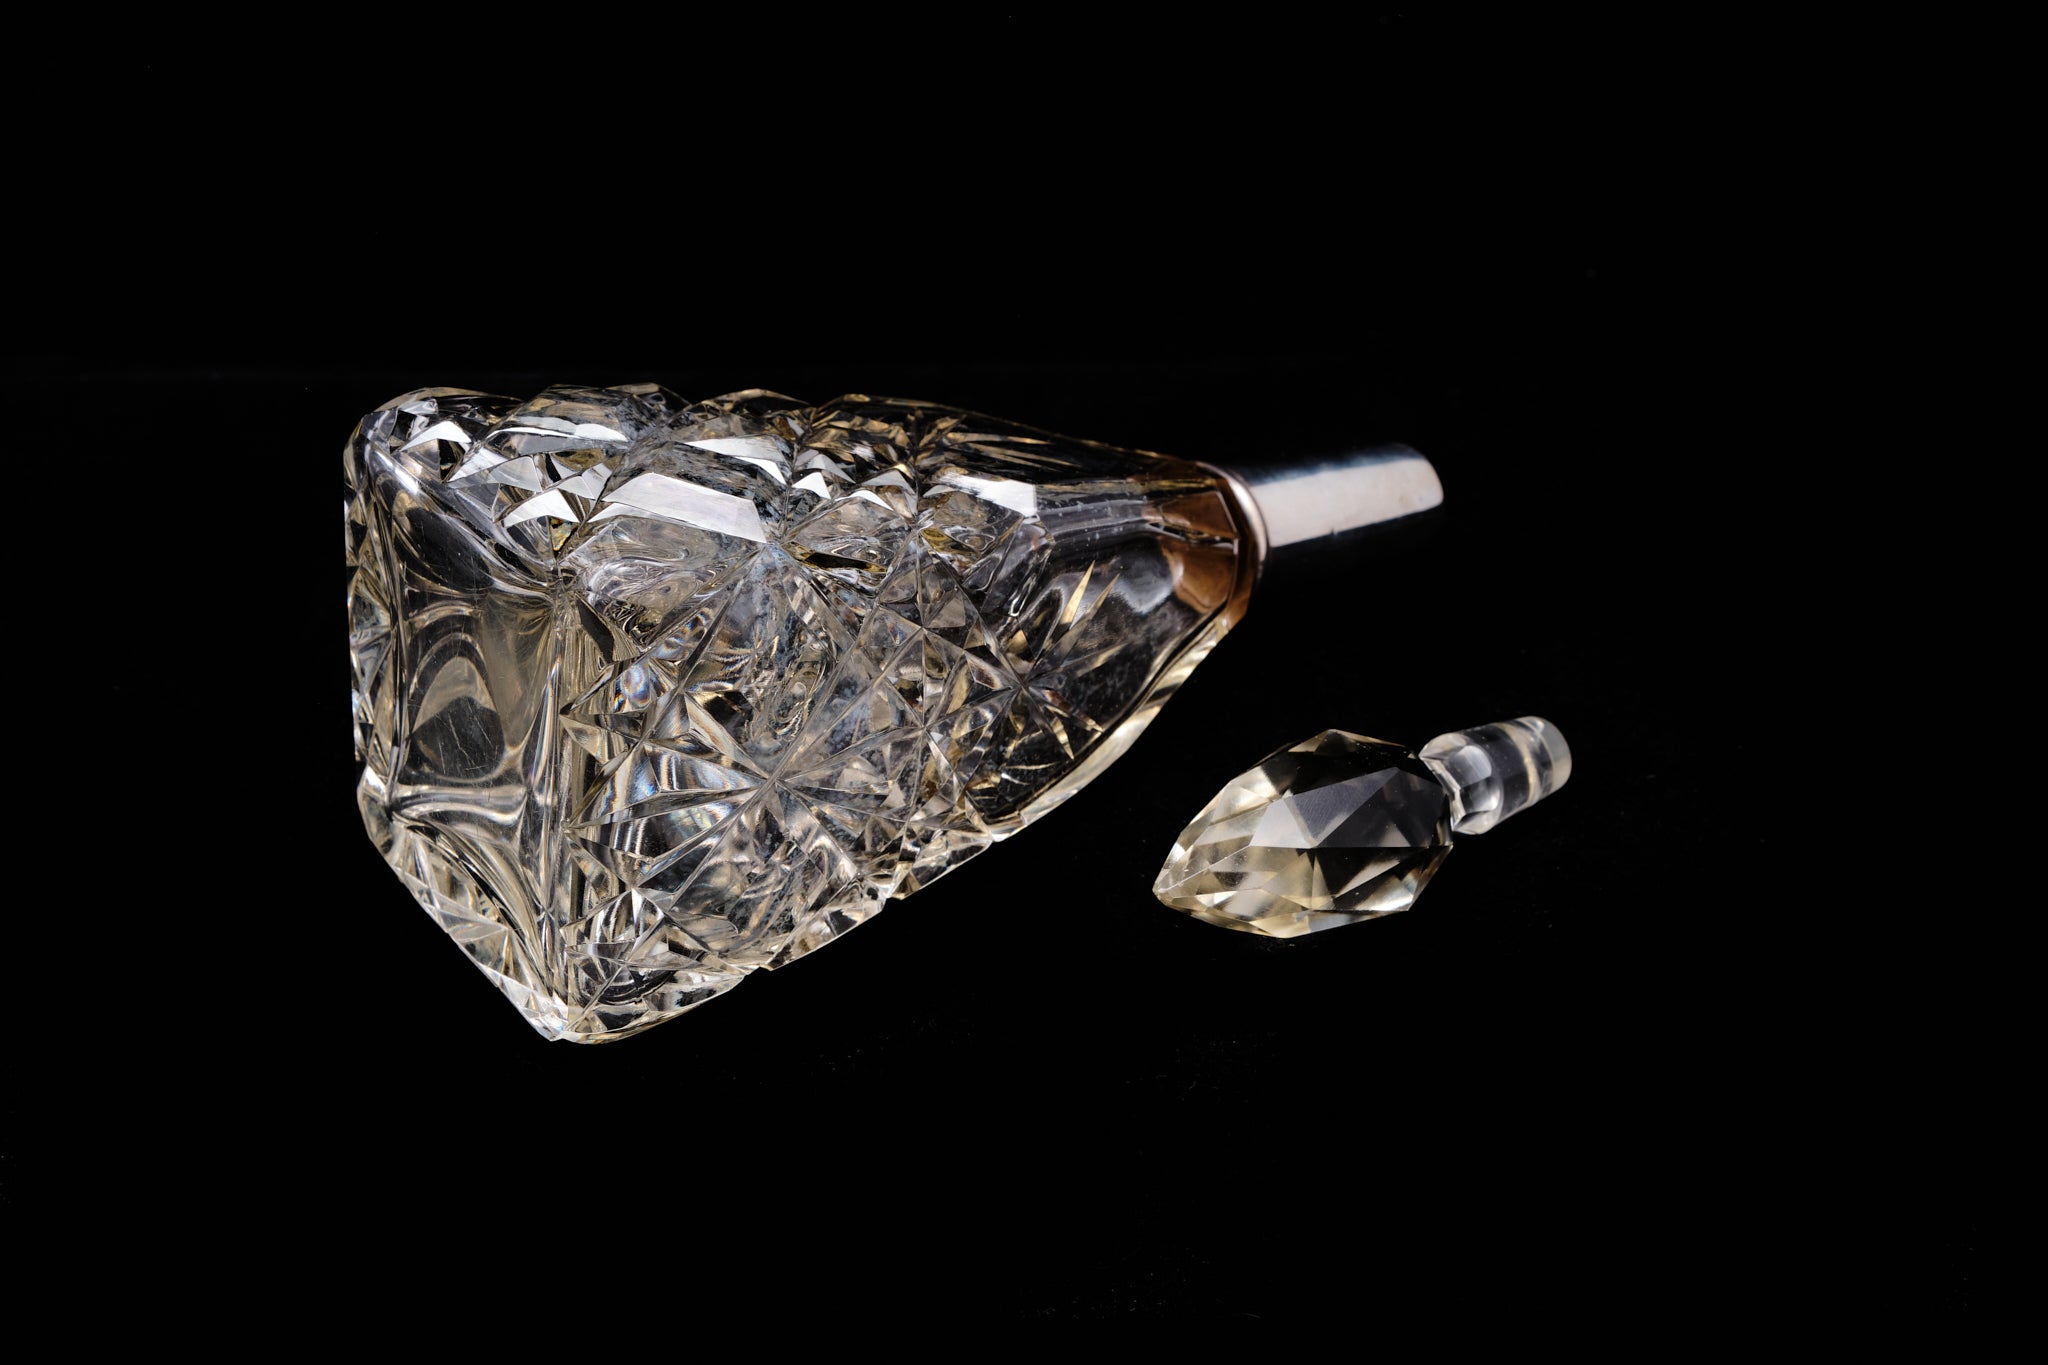 Edwardian Sterling Silver Collared Perfume Bottle